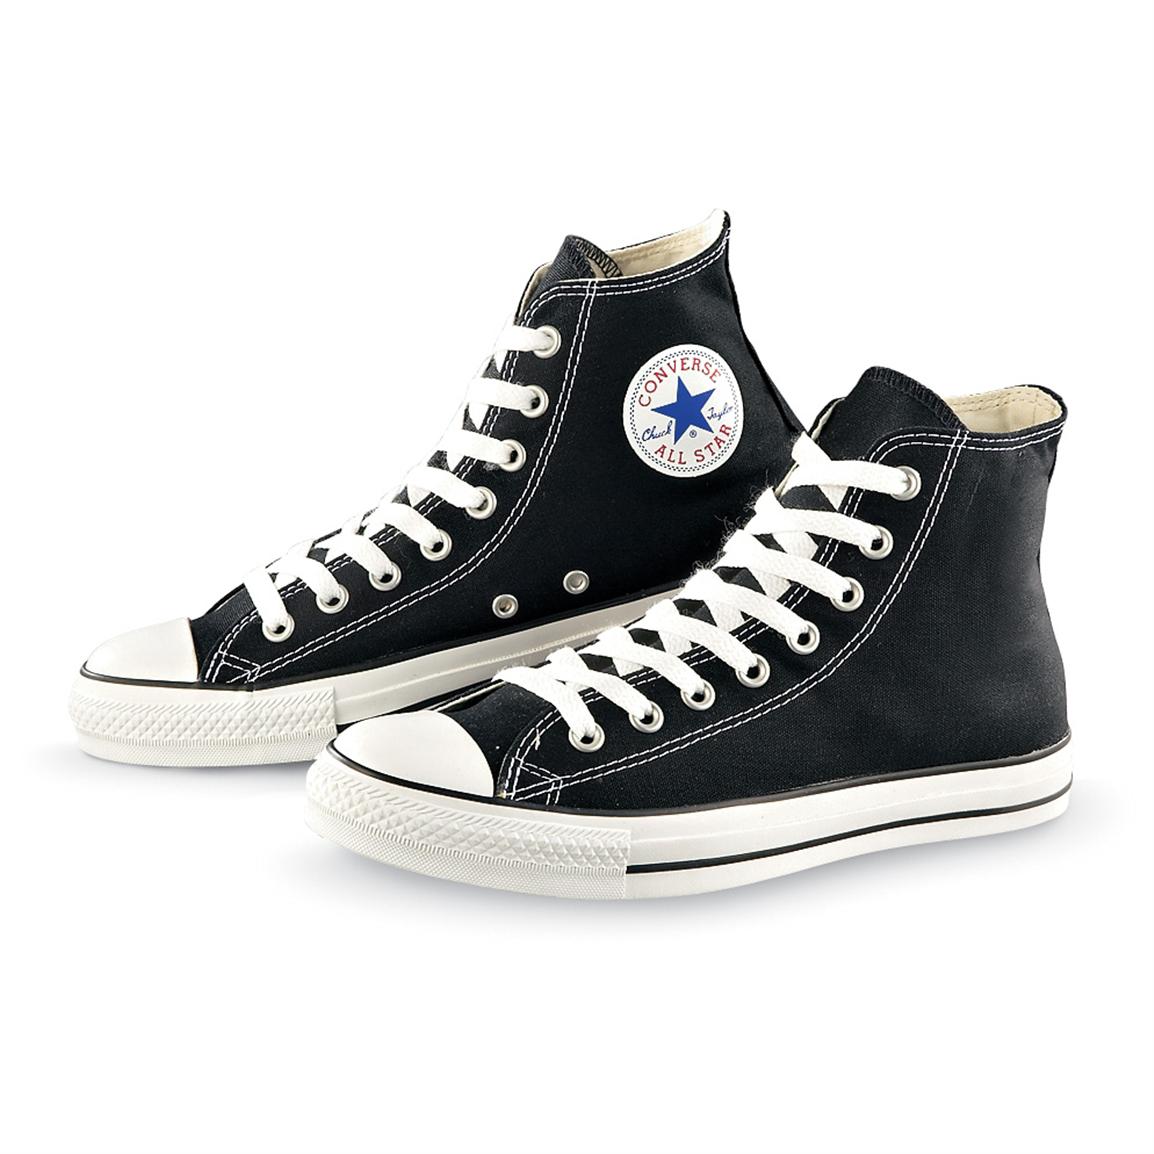 Converse® Chuck Taylor All Star™ Hi top Athletic Shoes